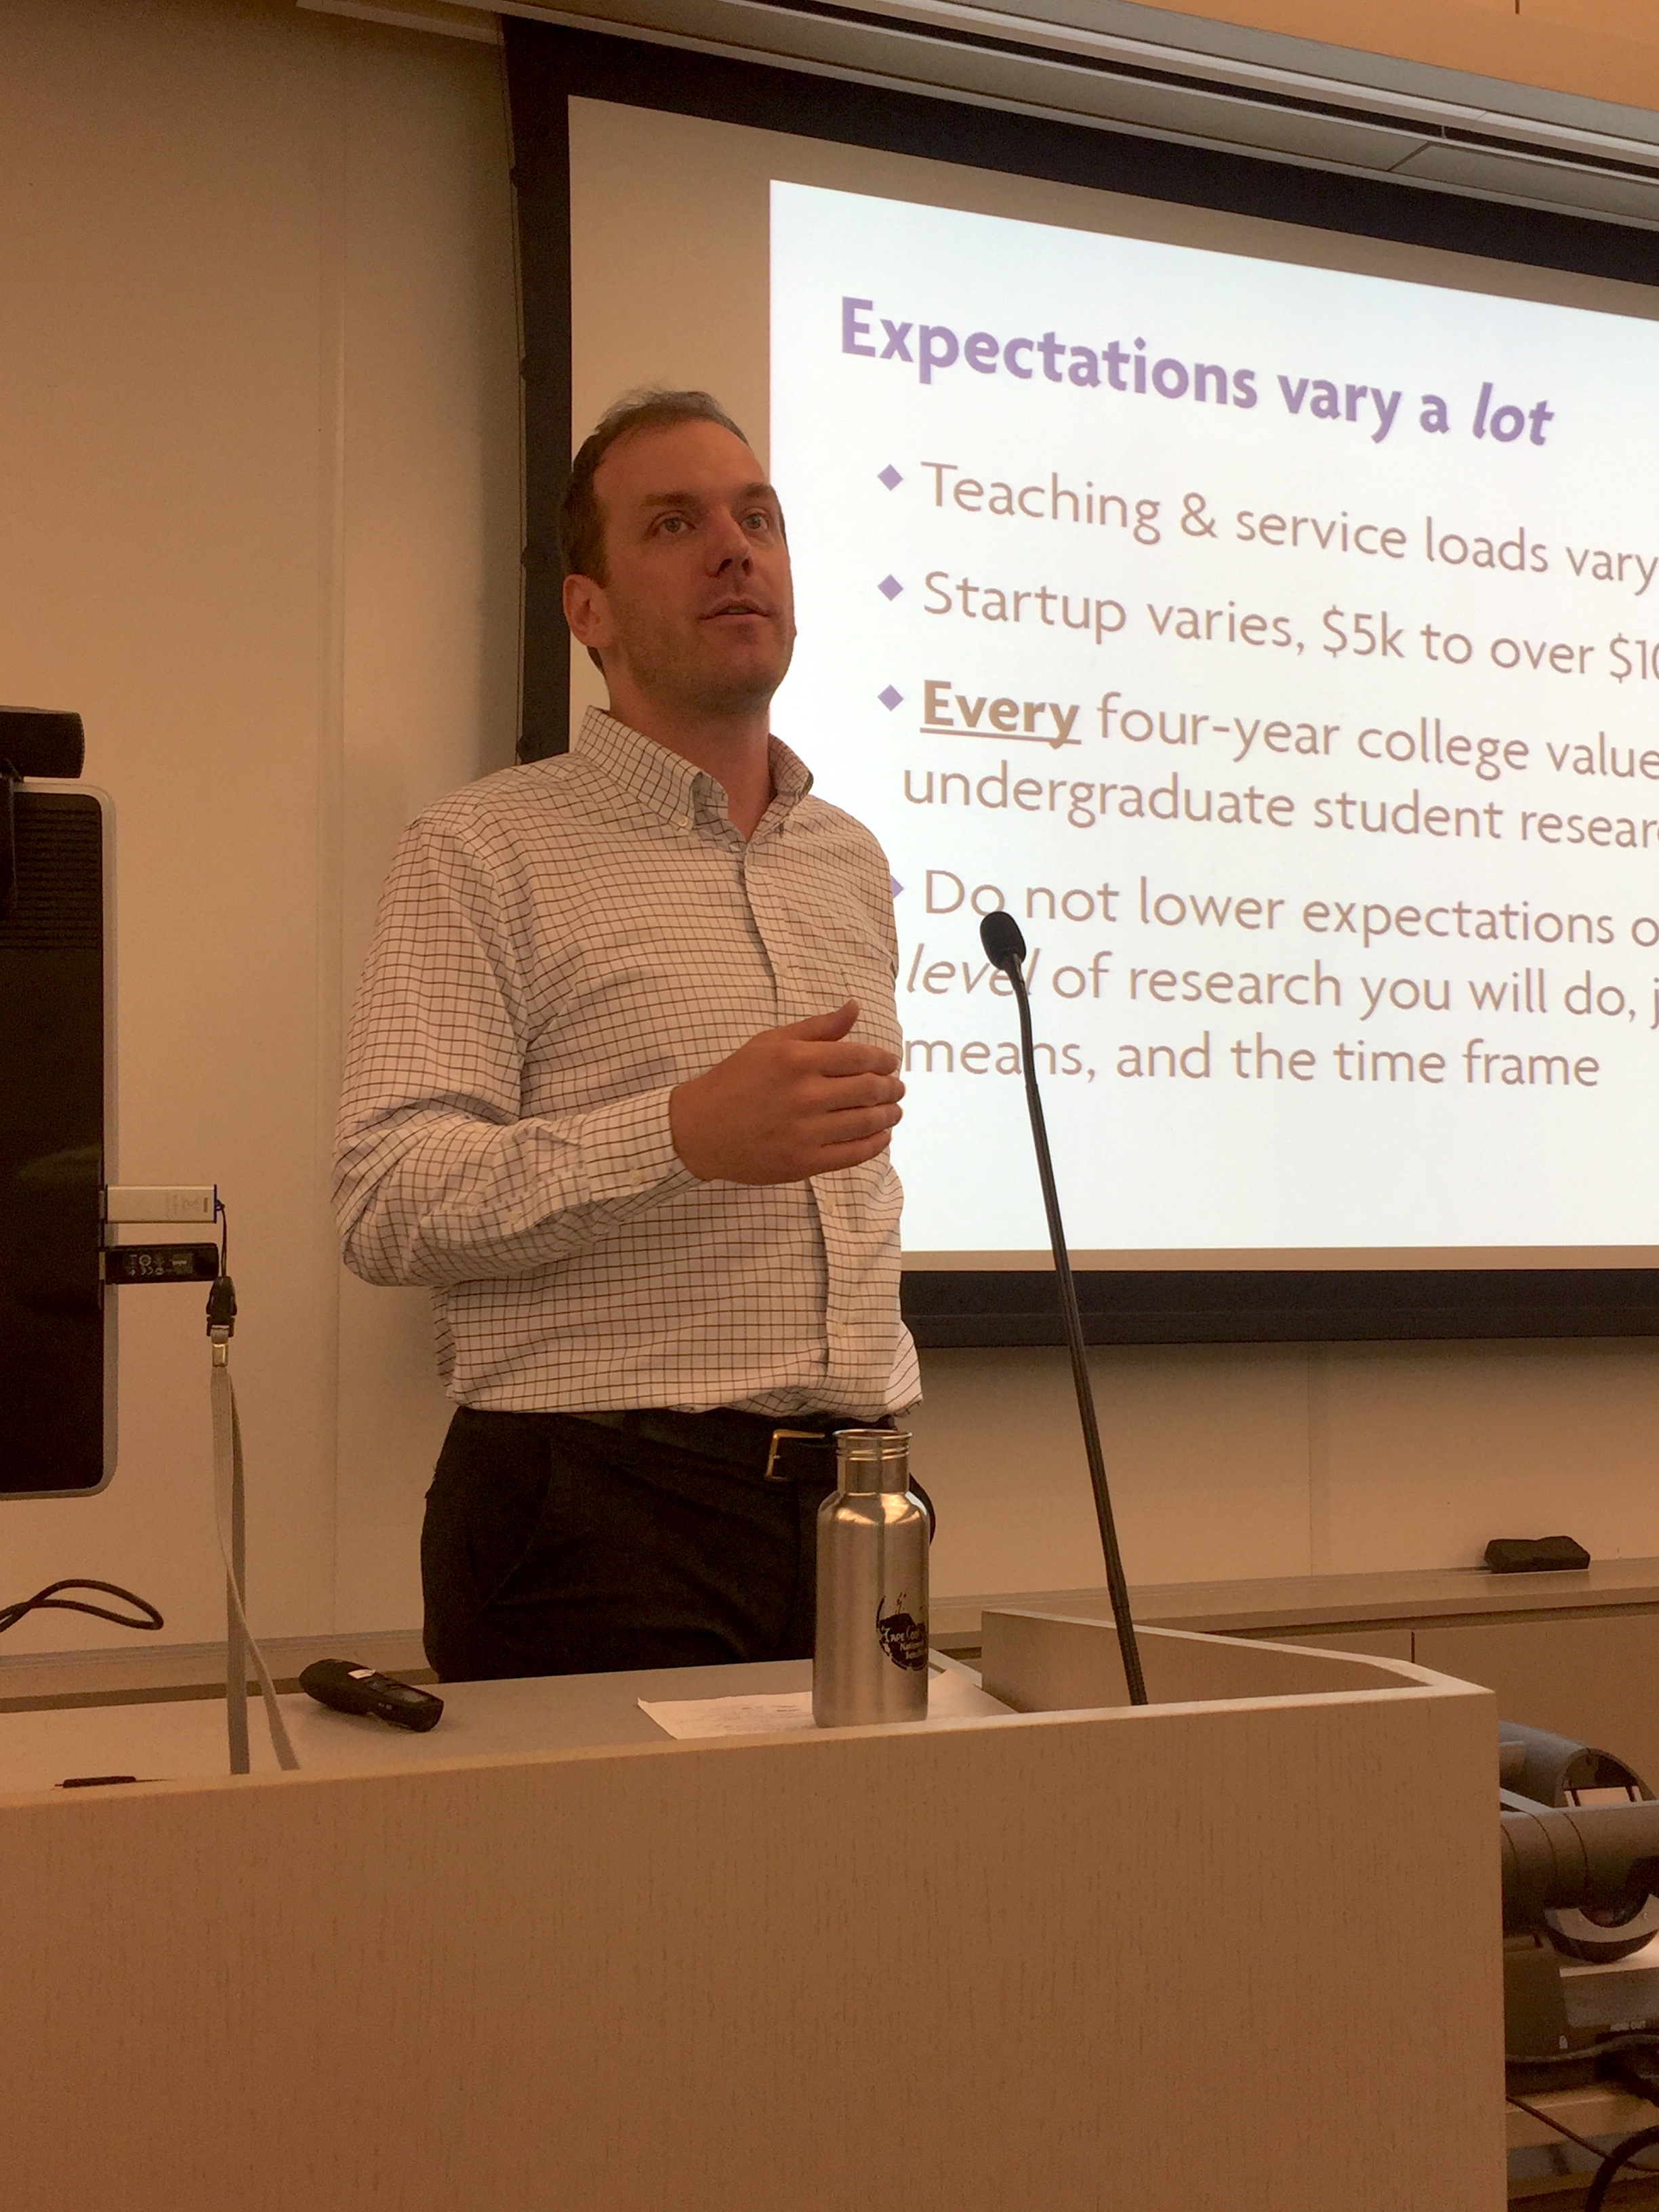 Jeffrey Werner in front of a slide that reads "Expectations vary a lot. Teaching and service load varies. Startup varies. Every four-year college values undergraduate research."